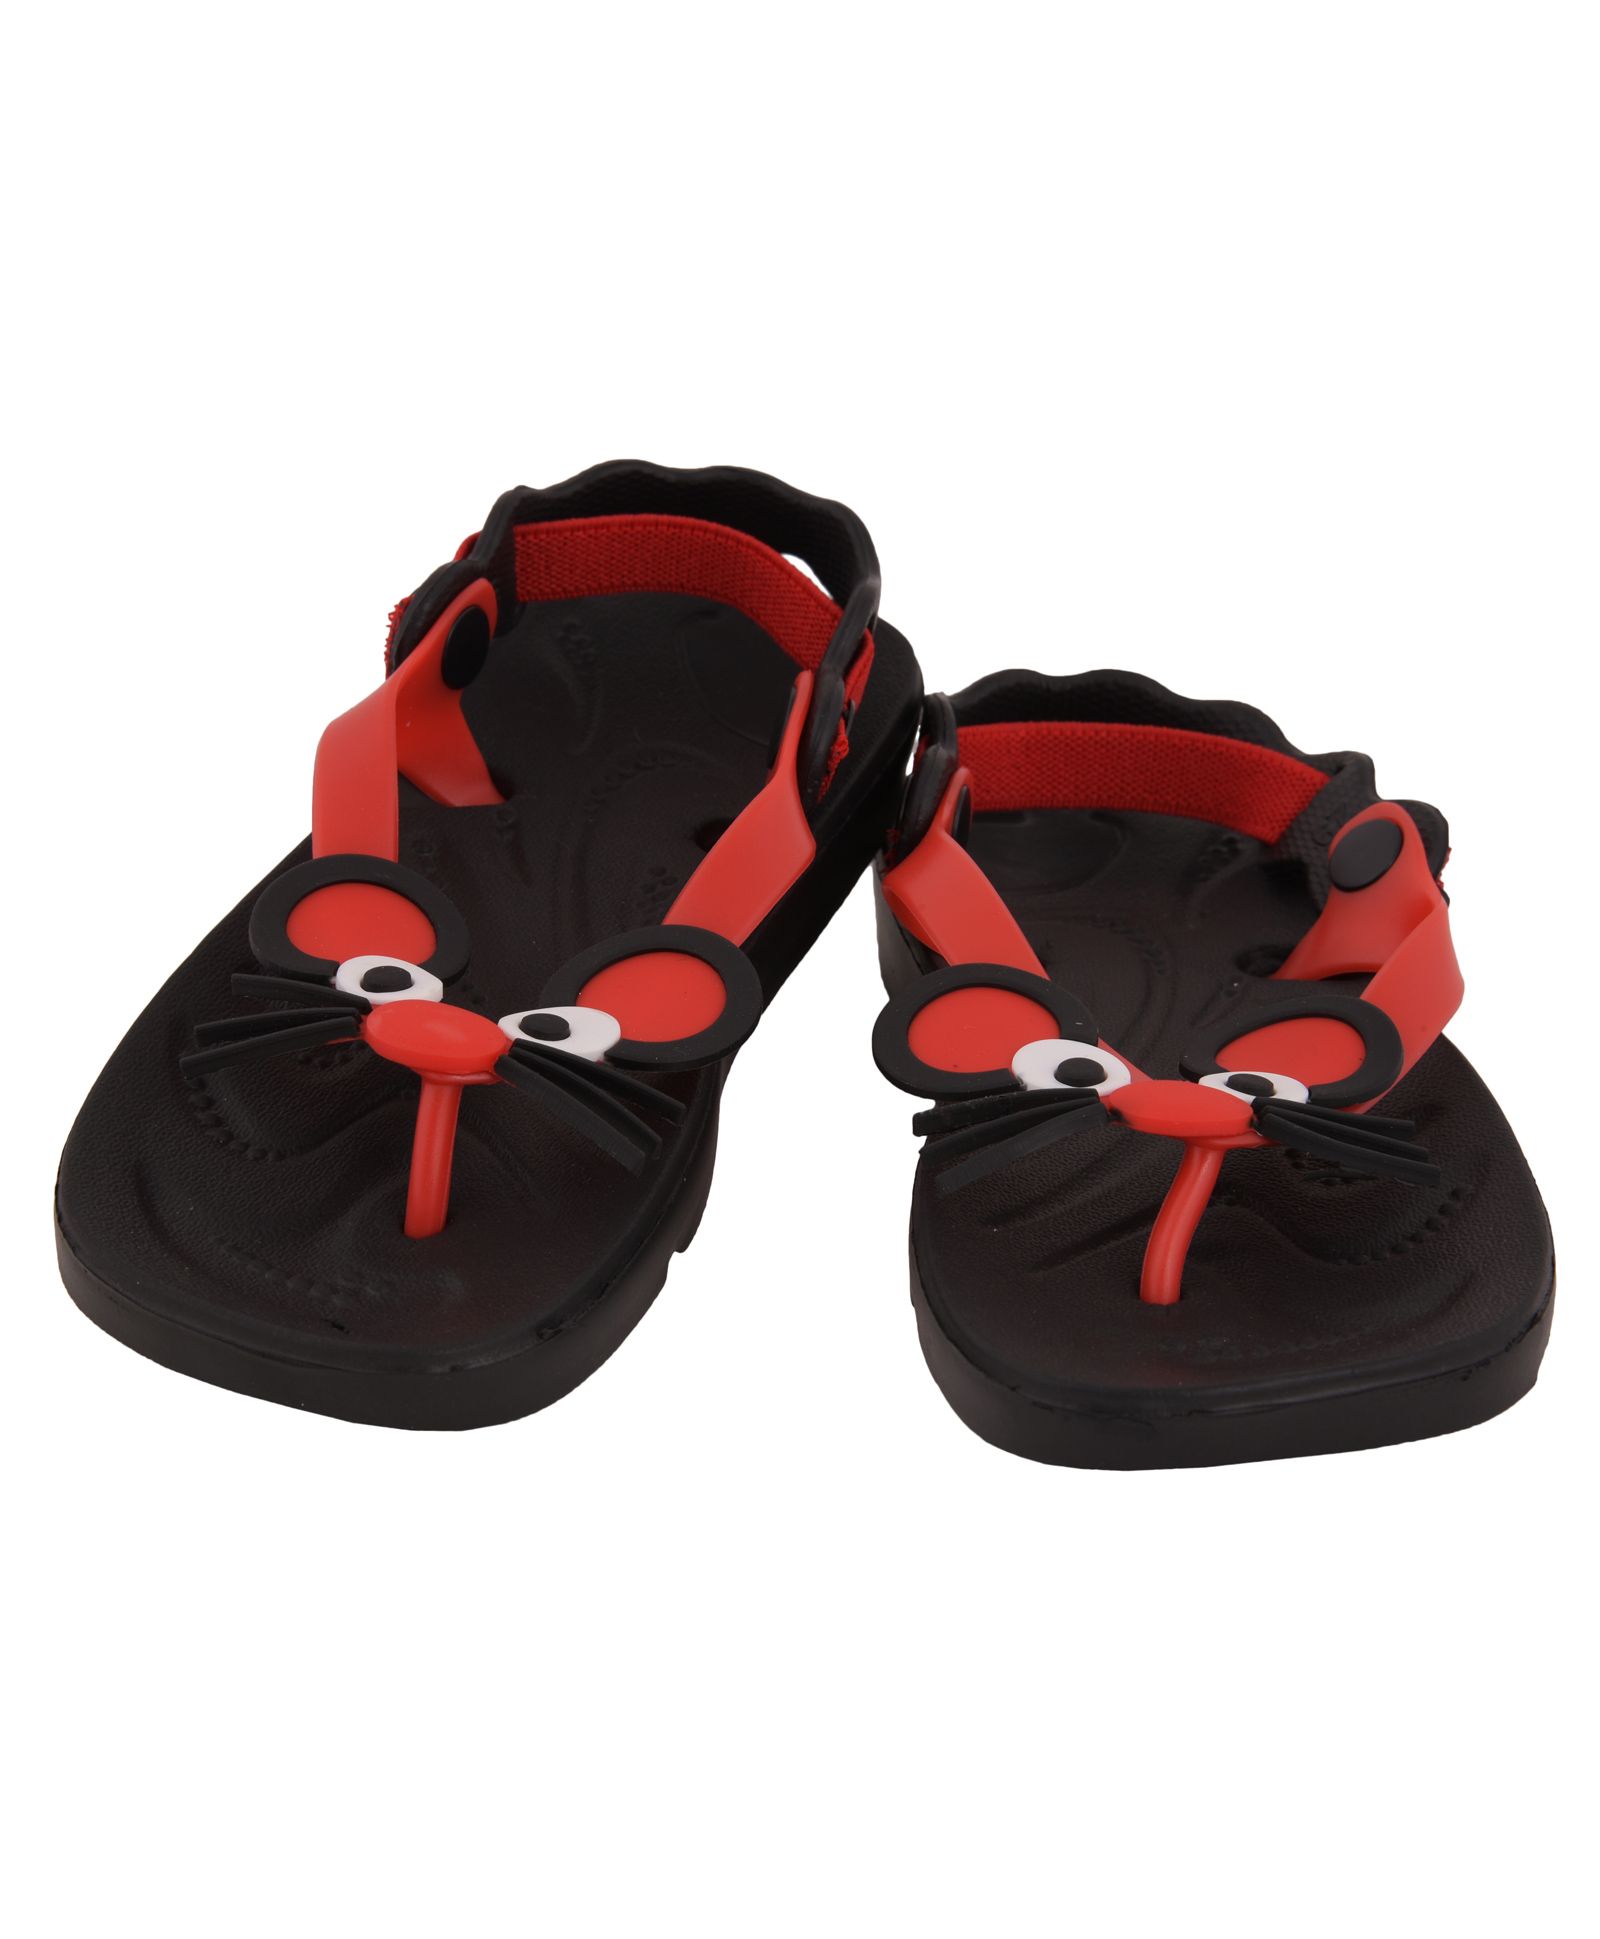 firstcry baby slippers